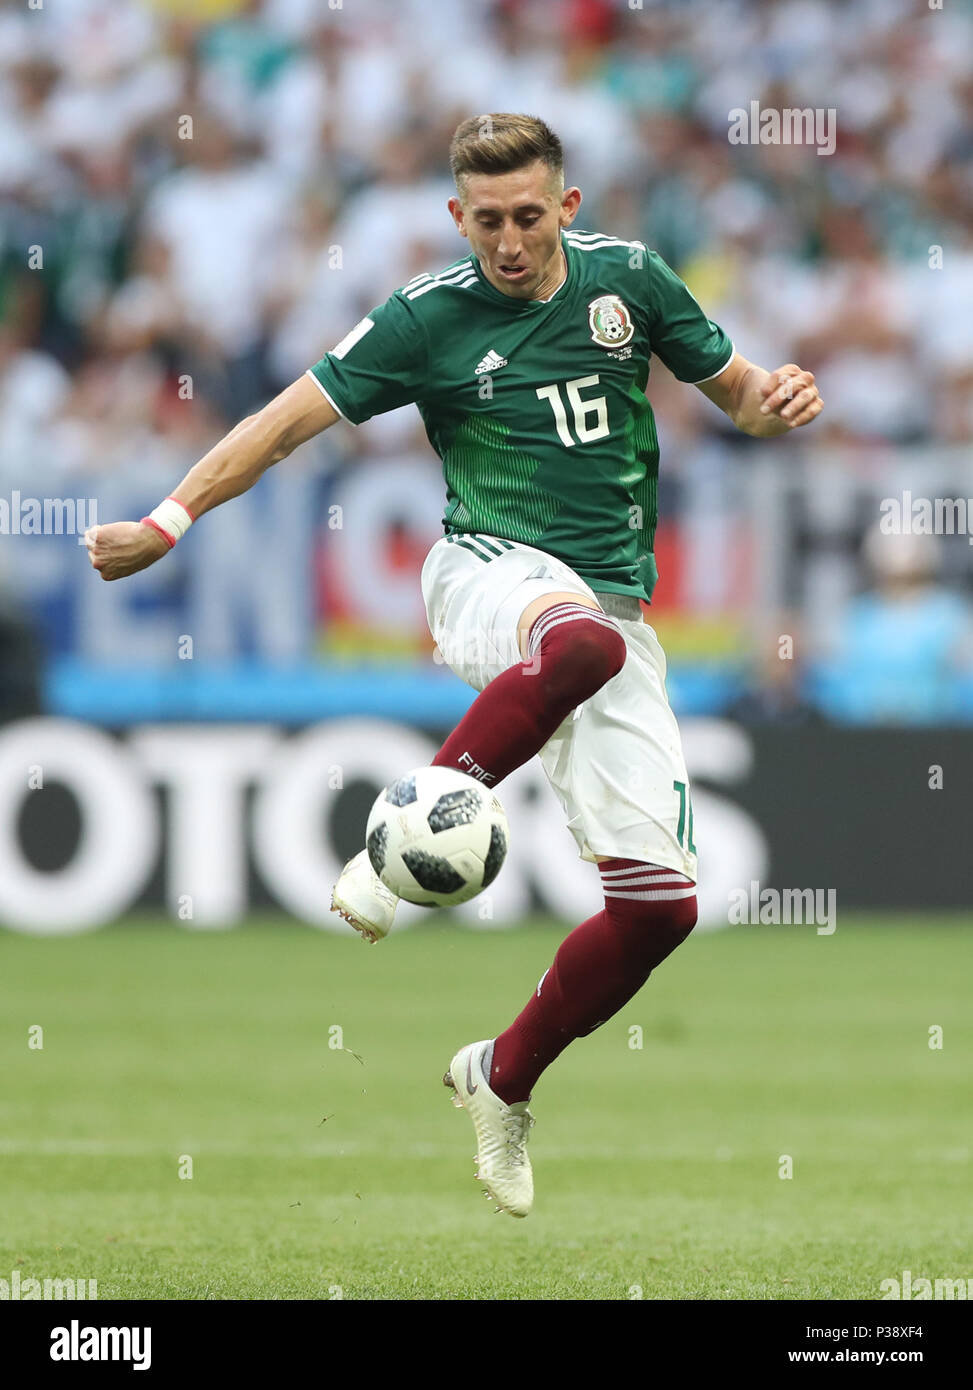 Moscow, Russia. 17th June, 2018. Hector Herrera of Mexico competes during a group F match between Germany and Mexico at the 2018 FIFA World Cup in Moscow, Russia, June 17, 2018. Credit: Xu Zijian/Xinhua/Alamy Live News Stock Photo